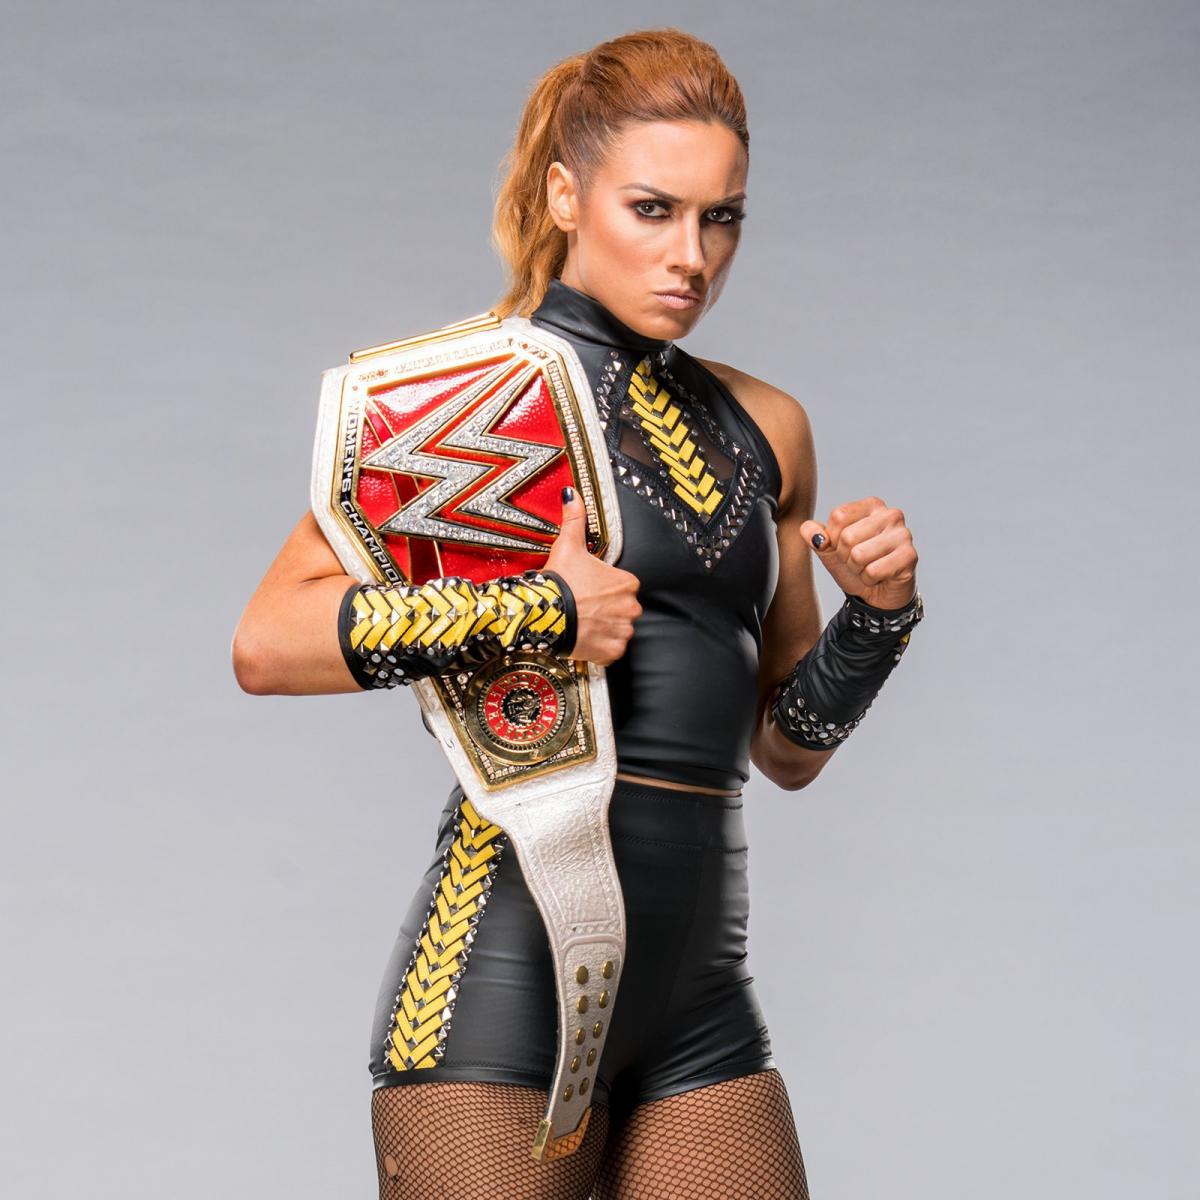 Day 53 of missing Becky Lynch from our screens!